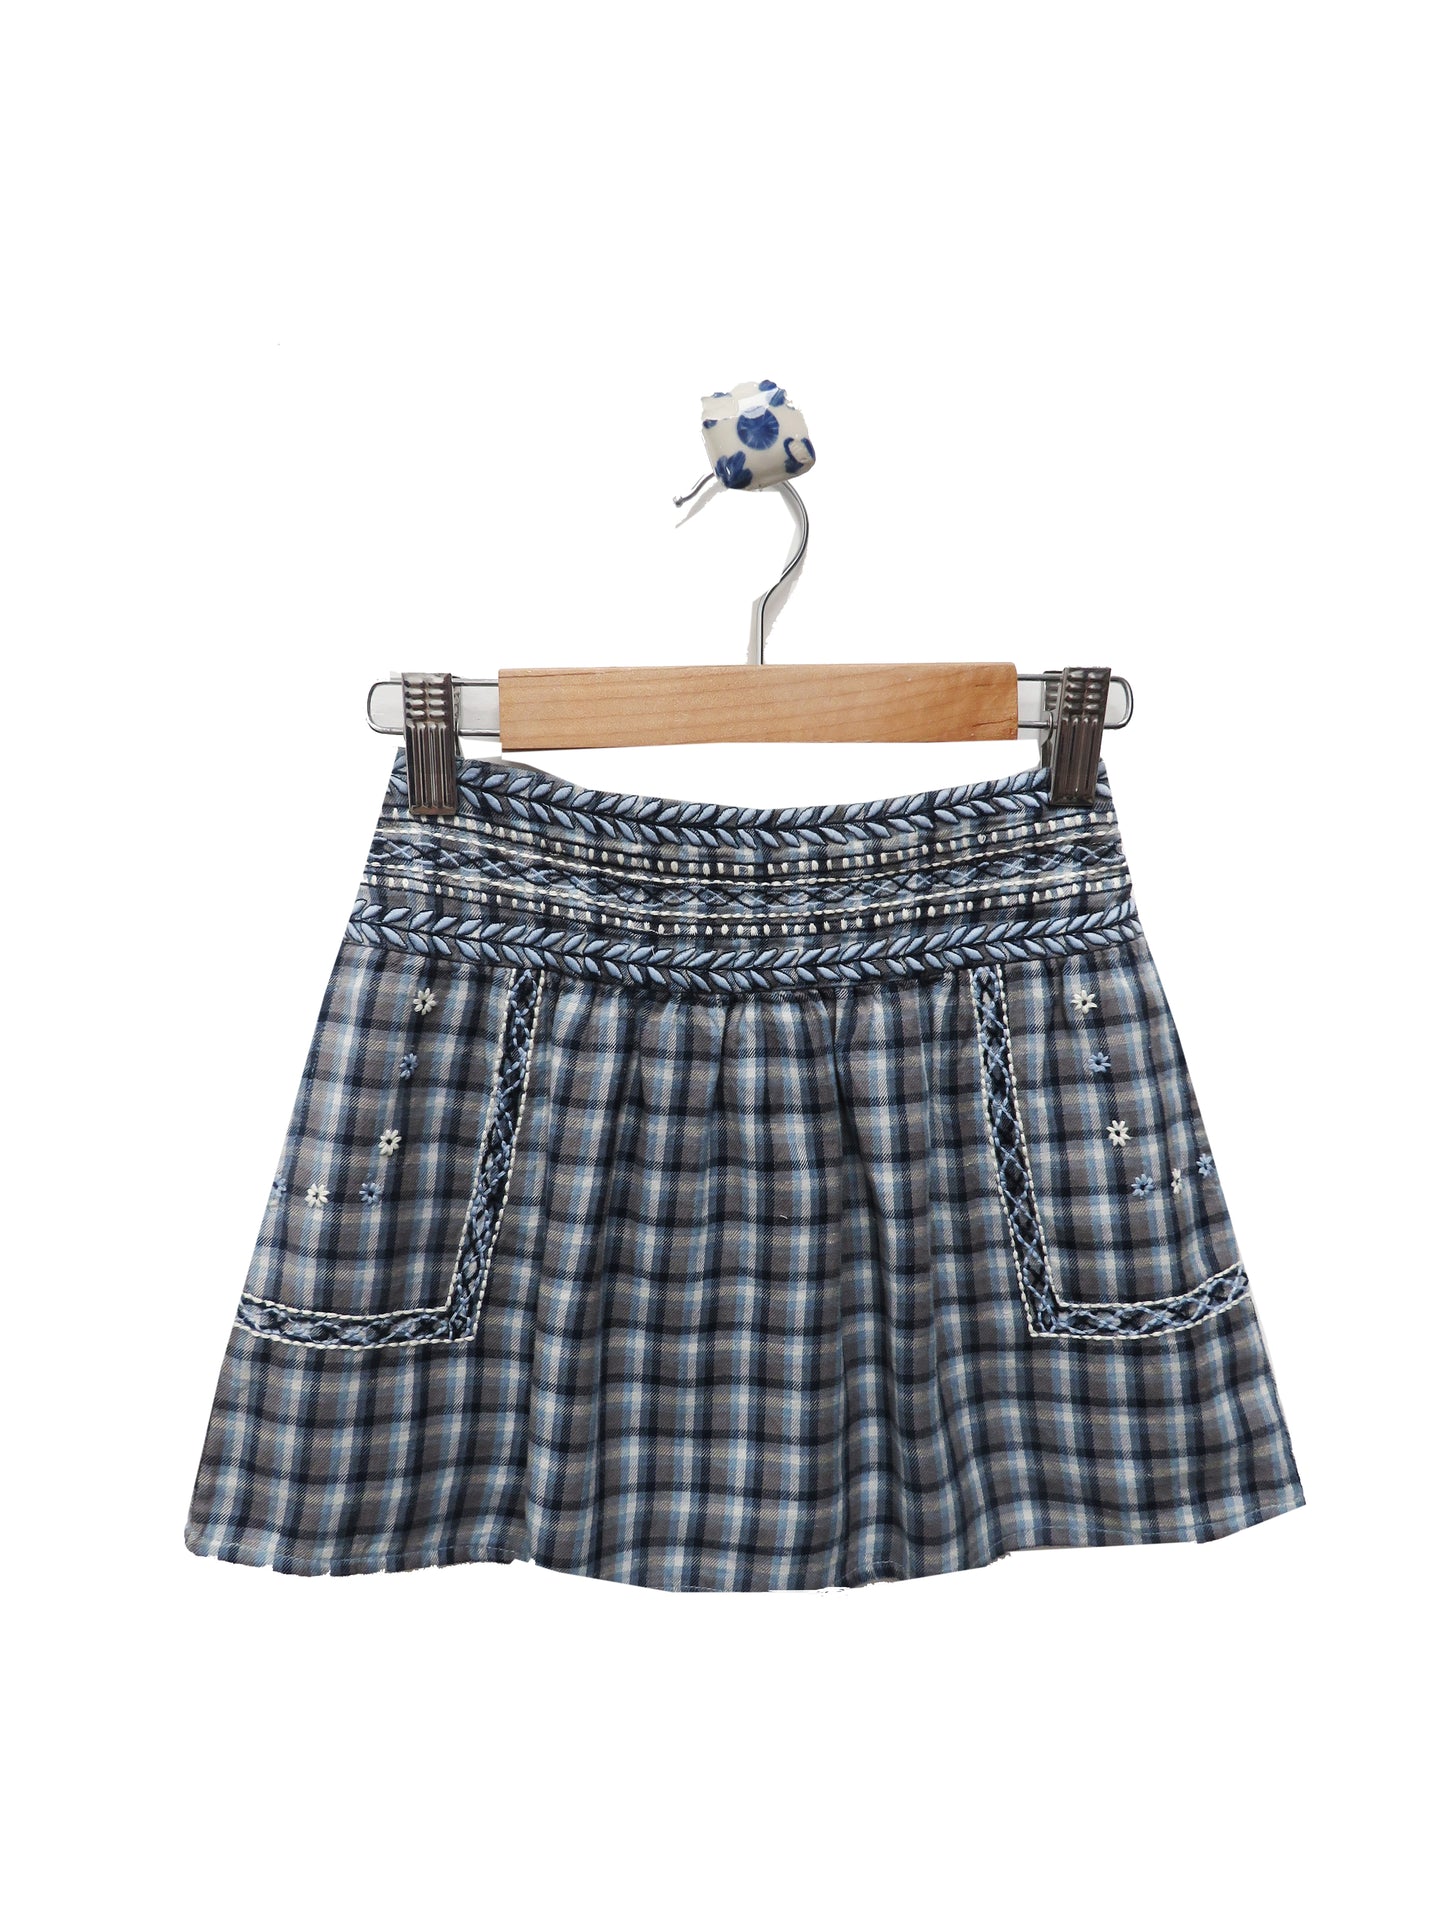 BLUE CHECKERED SKIRT WITH EMBROIERY ON THE WAIST BAND